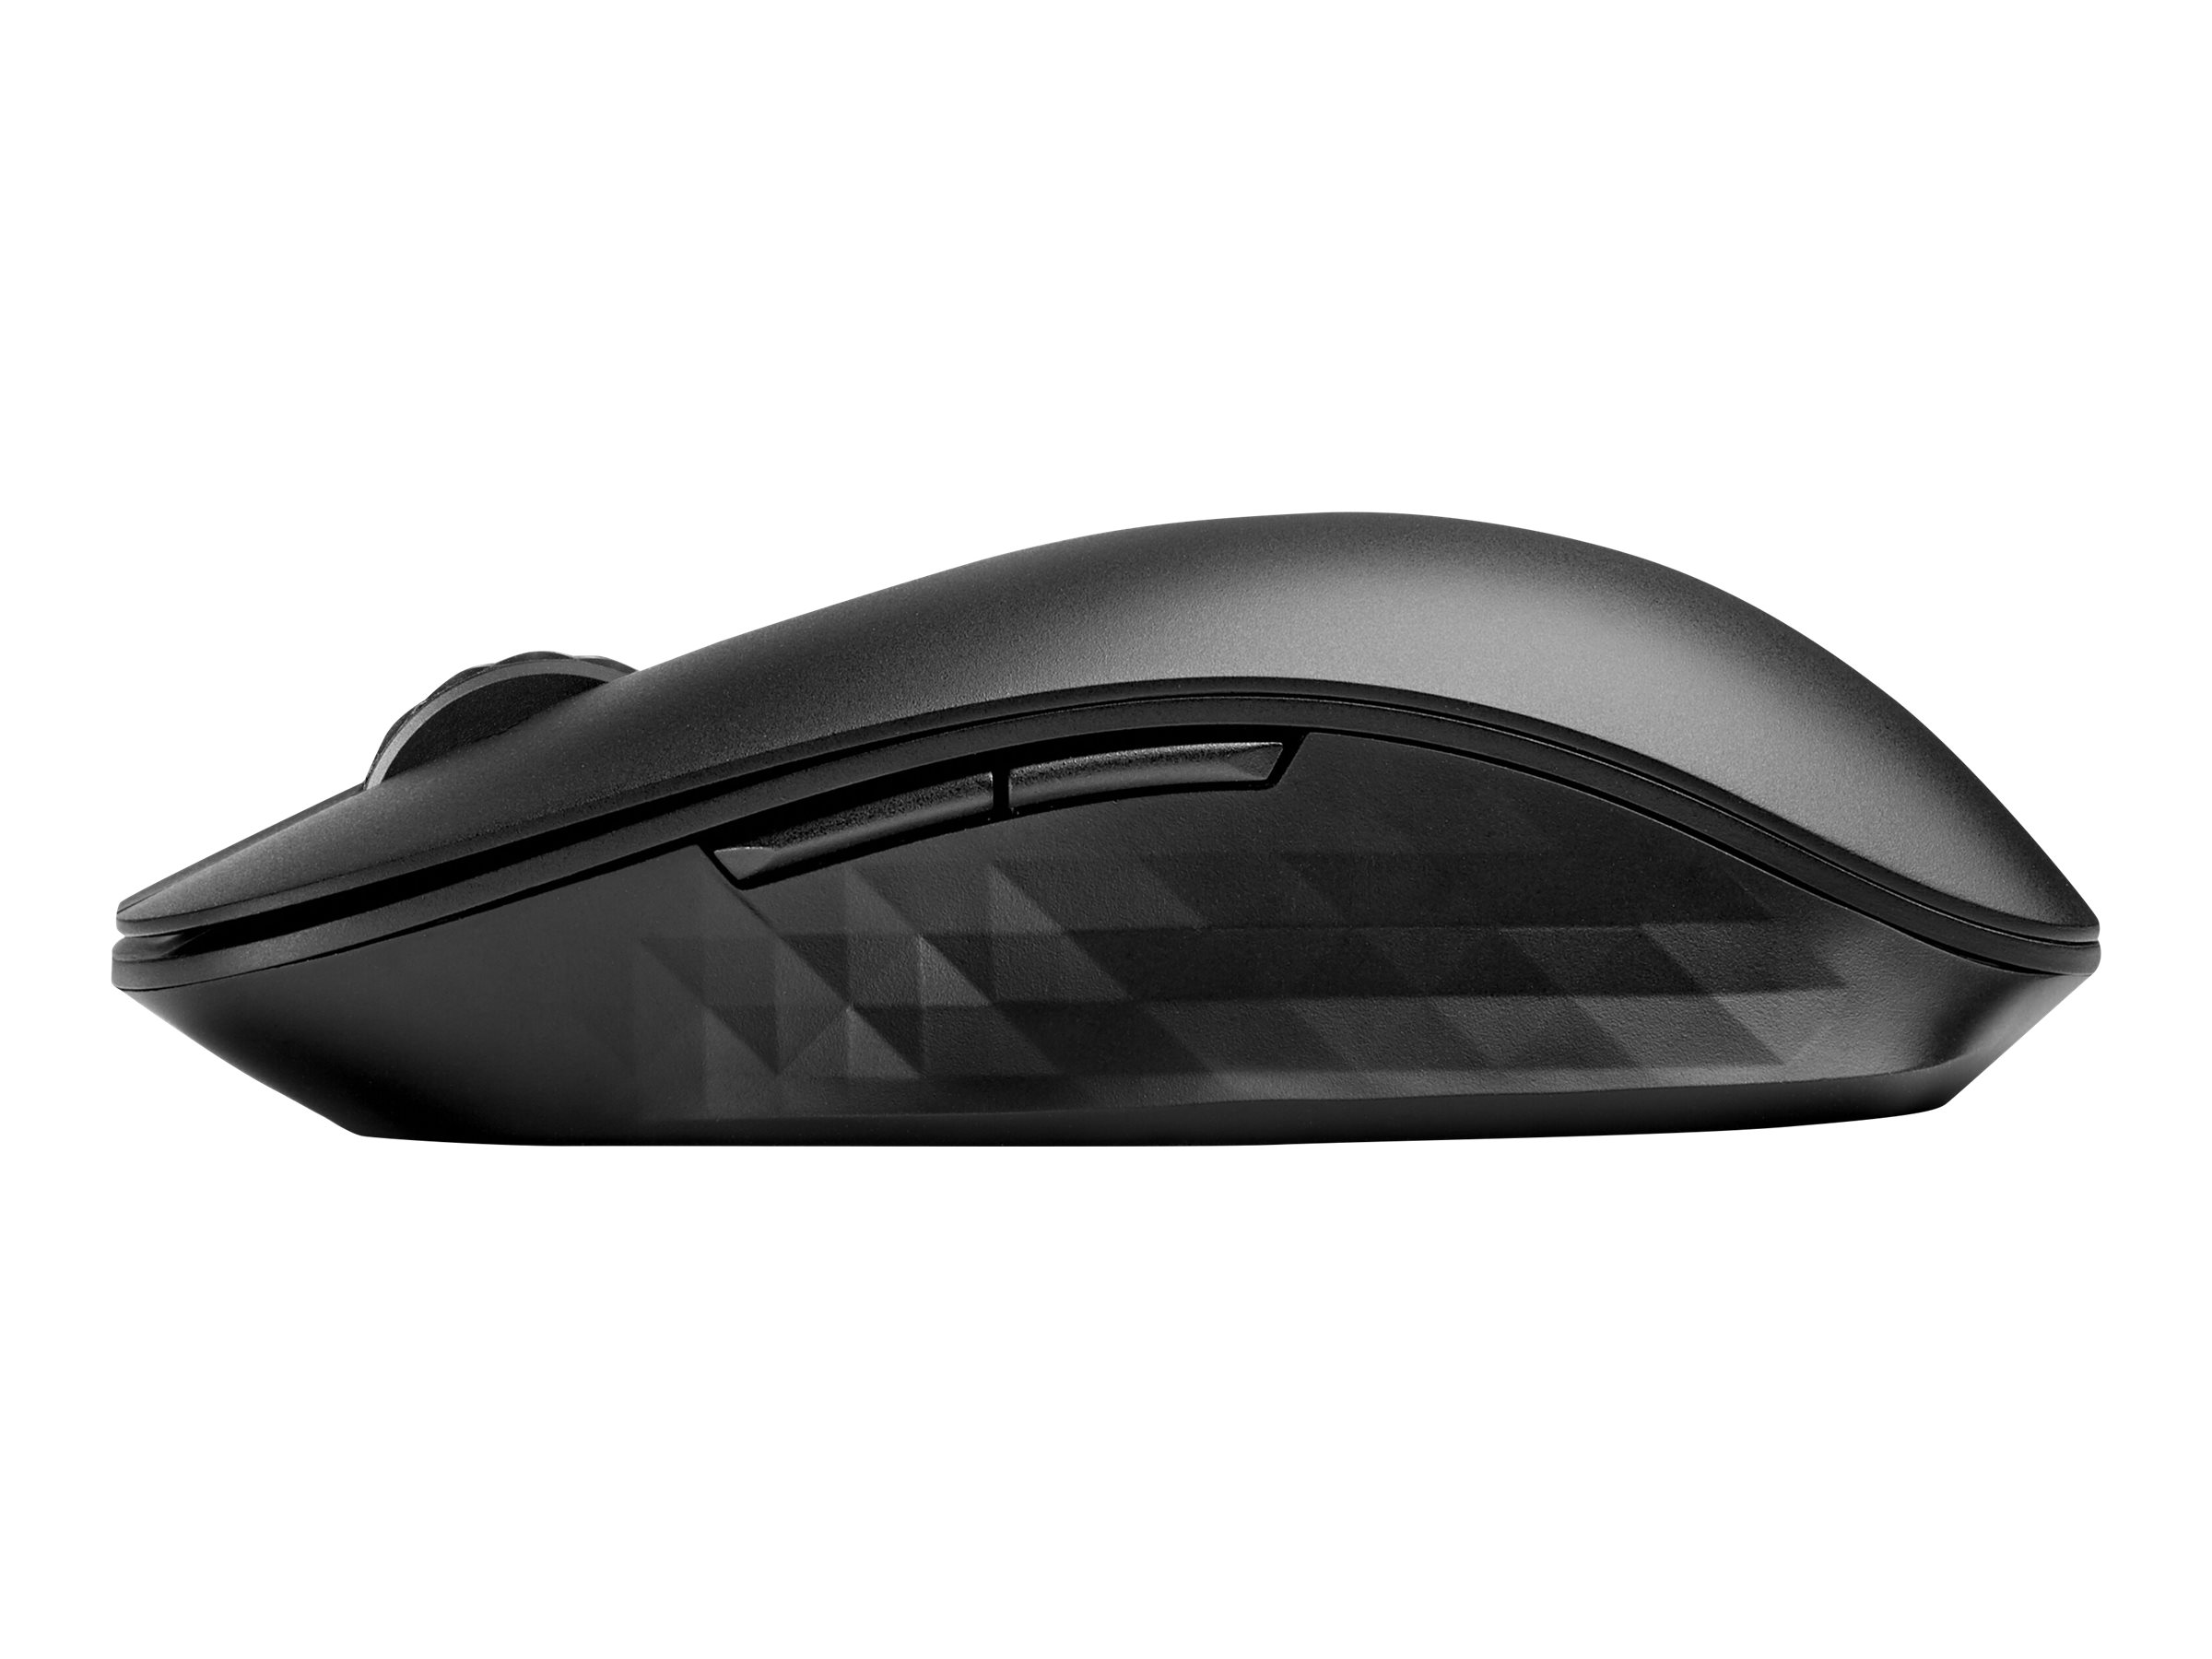 HP Travel - Mouse - 5 buttons